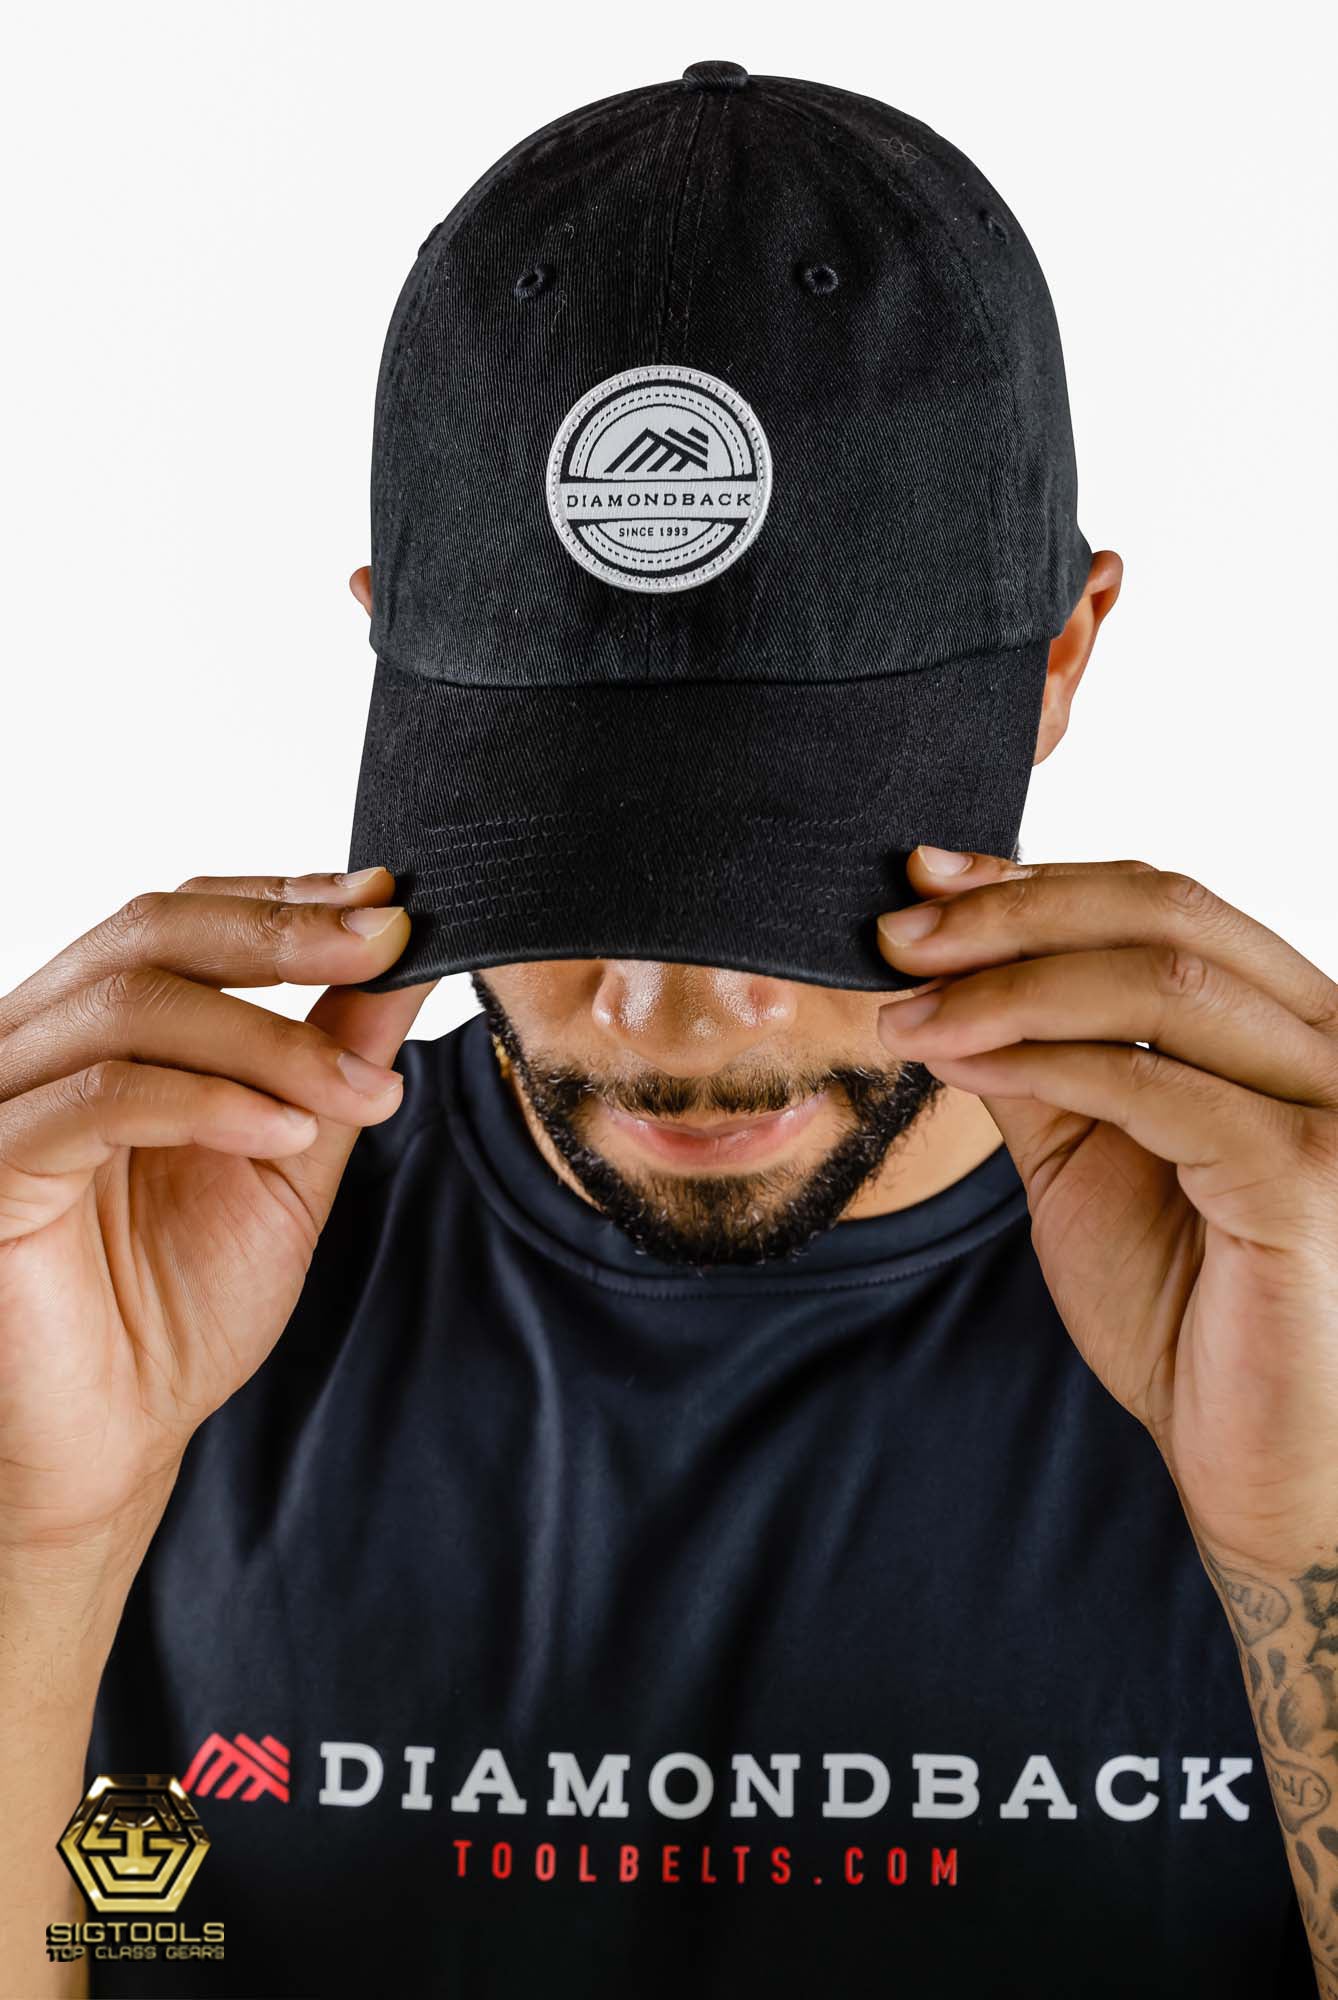 A person wearing a Diamondback Black and white dad hat with the brand's logo on the front, showcasing the hat's style and fit when worn